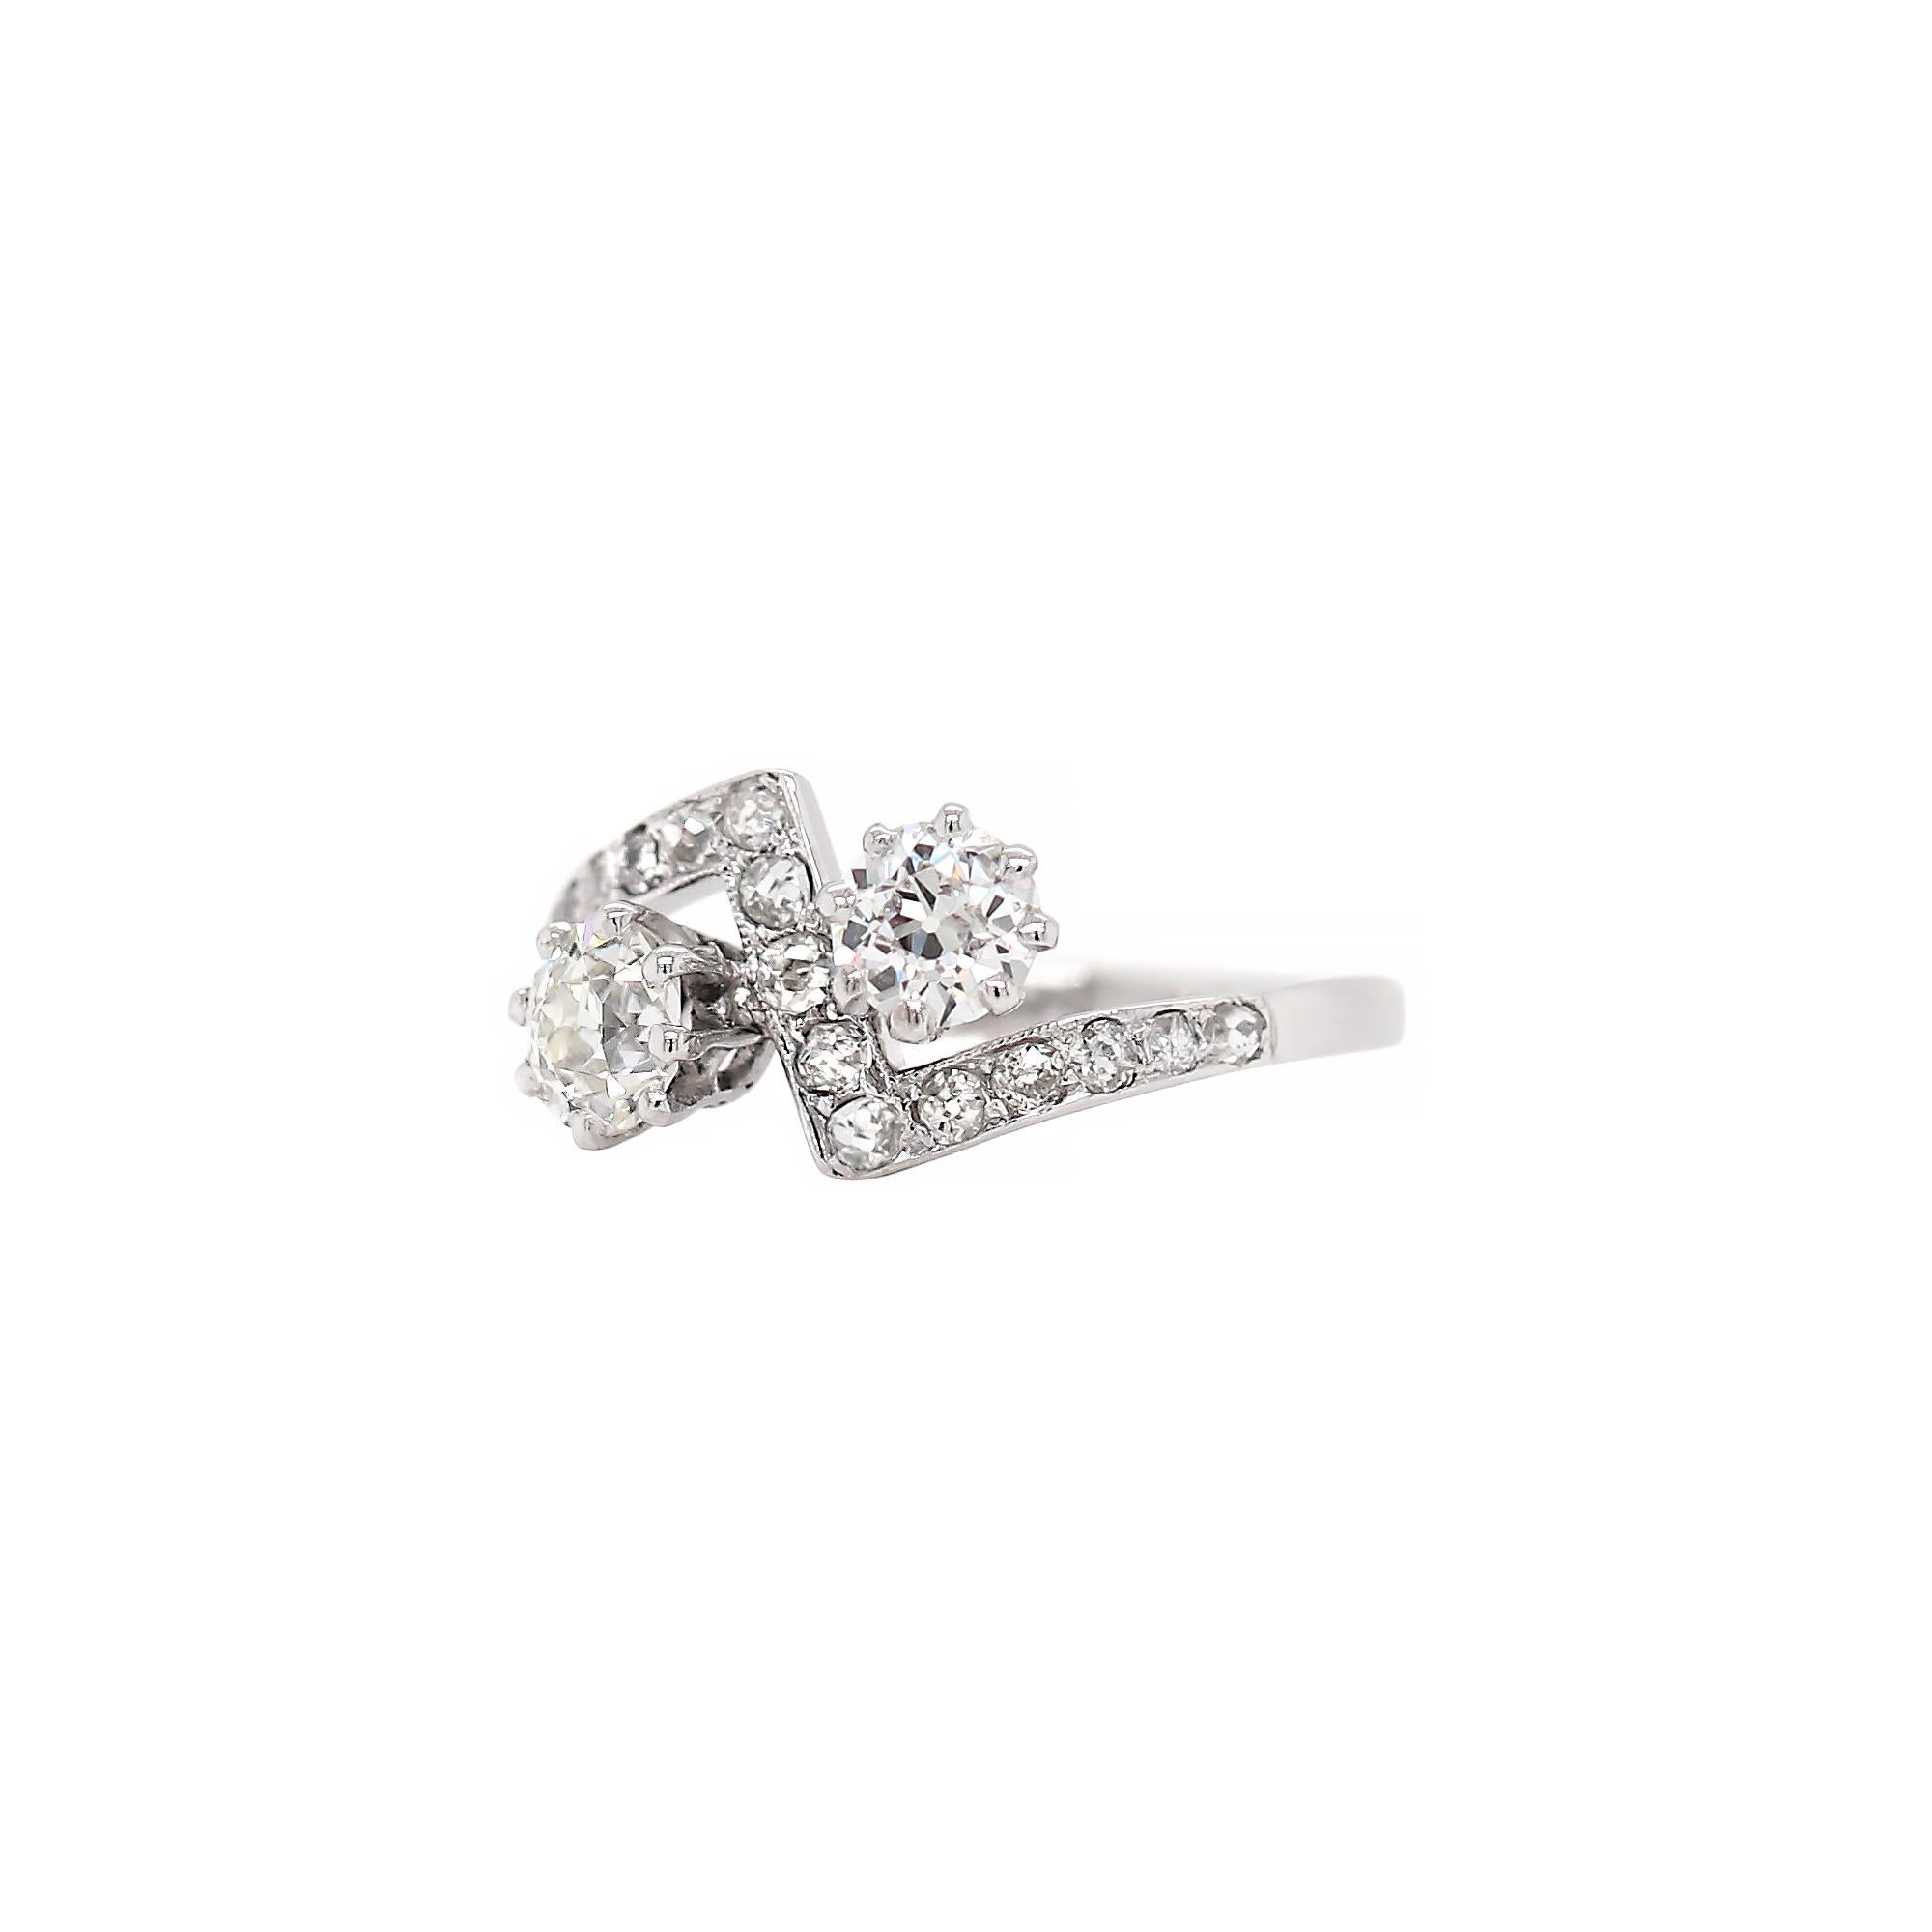 This one of a kind Art Deco engagement ring features two old cut diamonds with a combined weight of 0.96ct both set in eight claw open back settings. These beautiful stones are mounted in a crossover zig zag mount, pavé set with 15 old cut diamonds